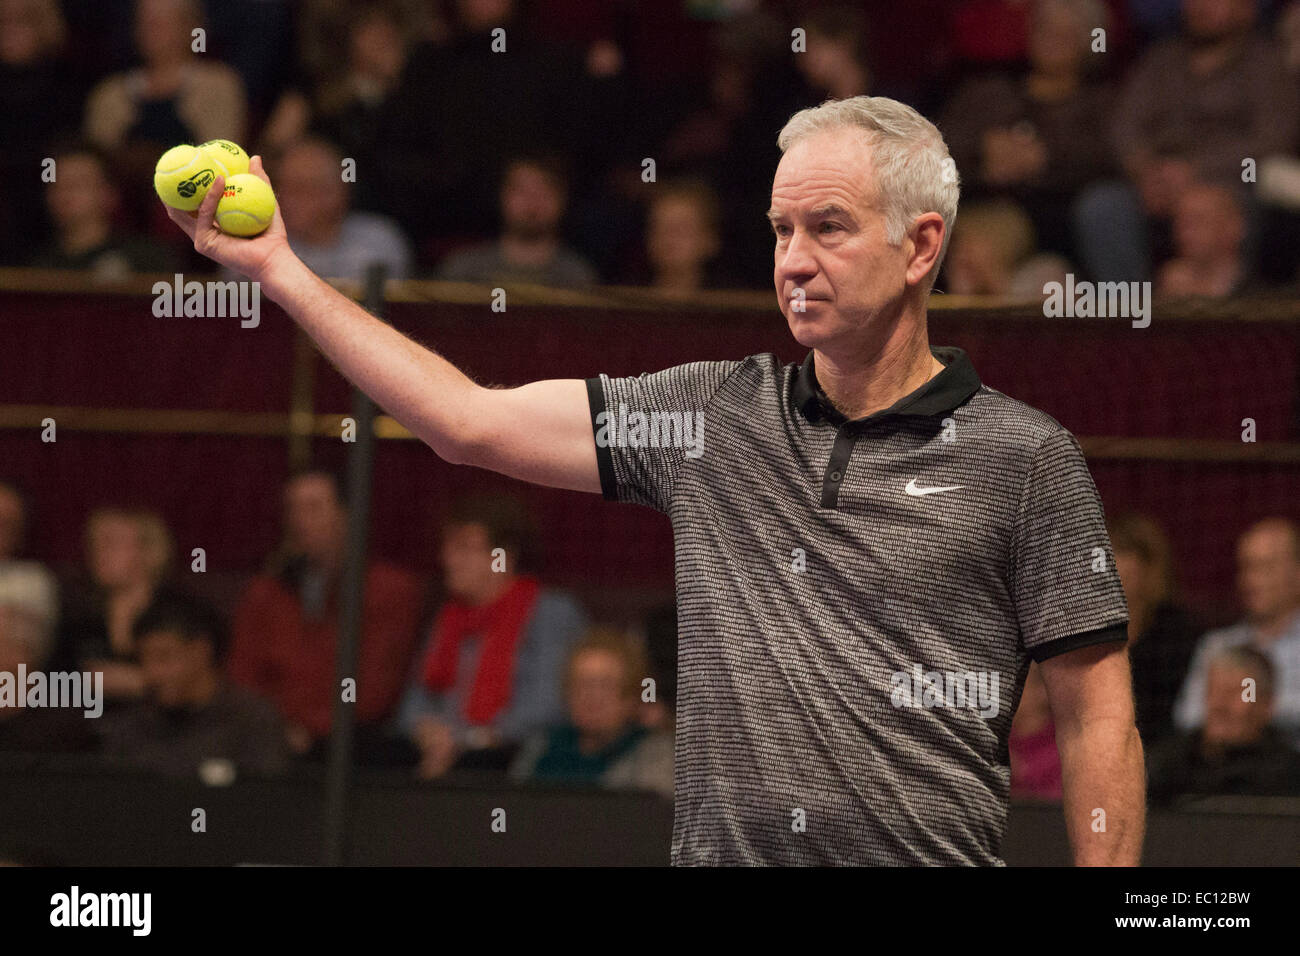 London, UK. 7 December 2014. Pictured: John McEnroe. 22nd Mylan World Team Tennis Smash Hits, taking place at the Royal Albert Hall, London, for the first time. Event participants include Team Elton John: Andy Roddick, John McEnroe, Heather Watson and Martina Hingis and Team Billie Jean: Kim Clijsters, Sabine Lisicki, Tim Henman and Jamie Murray. The event raises money for the Elton John Aids Foundation (EJAF). The event takes place during Statoil Masters Tennis and the 2014 event was won by Team Billie Jean. Credit:  Nick Savage/Alamy Live News Stock Photo